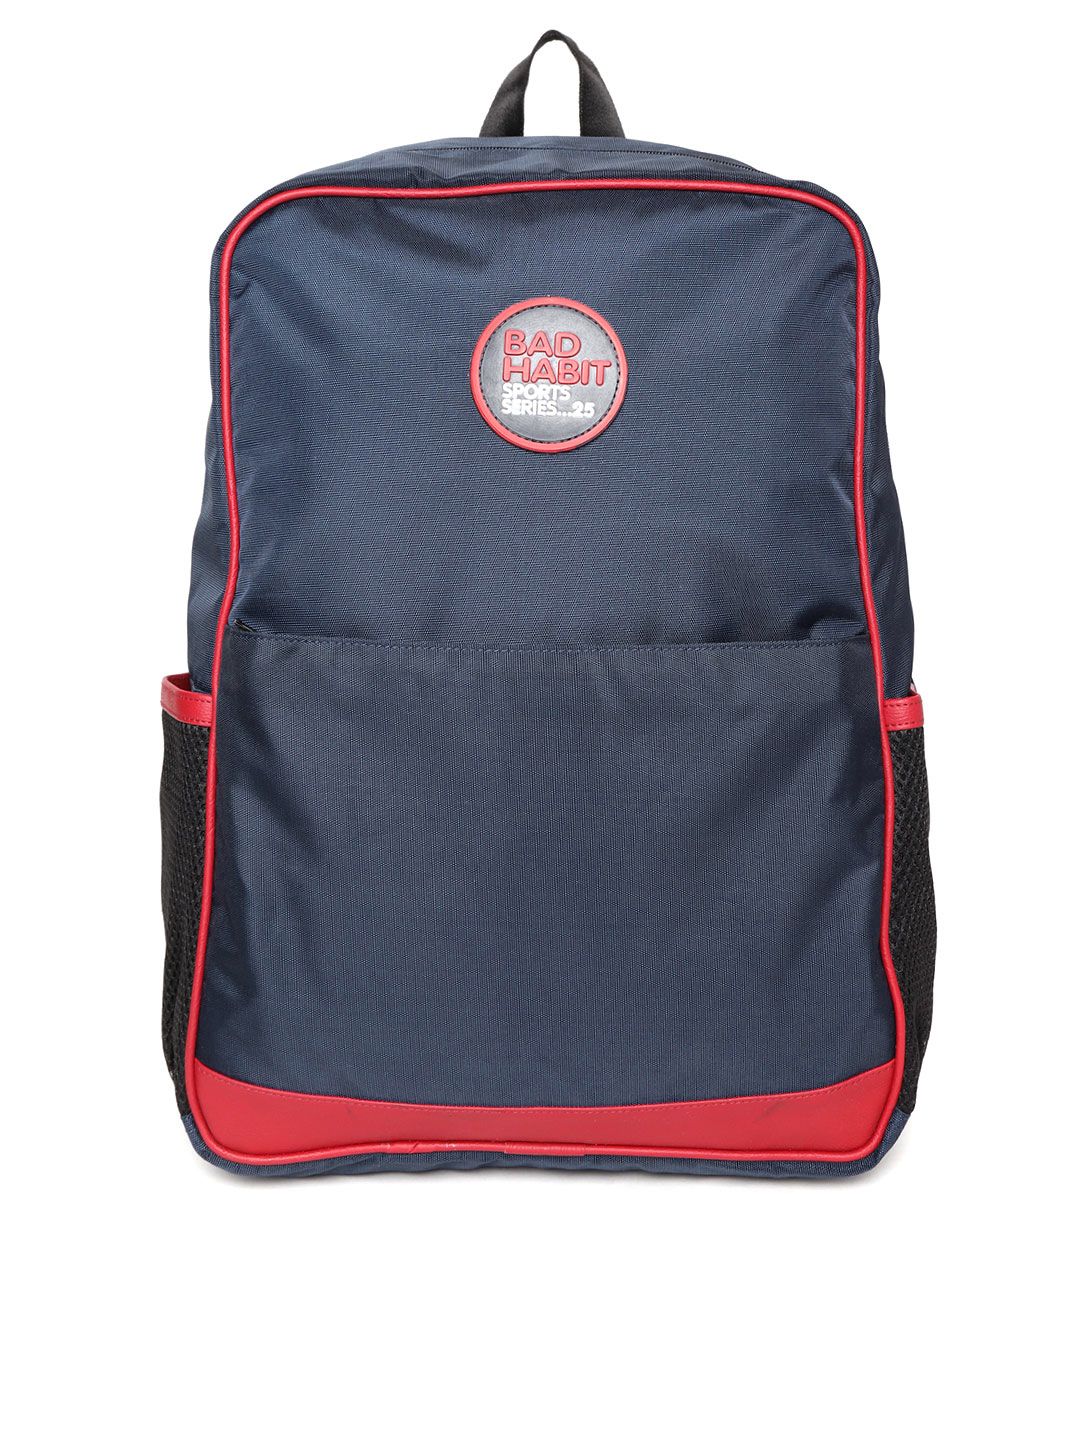 BAD HABIT Unisex Navy Blue Solid Laptop Backpack Price in India